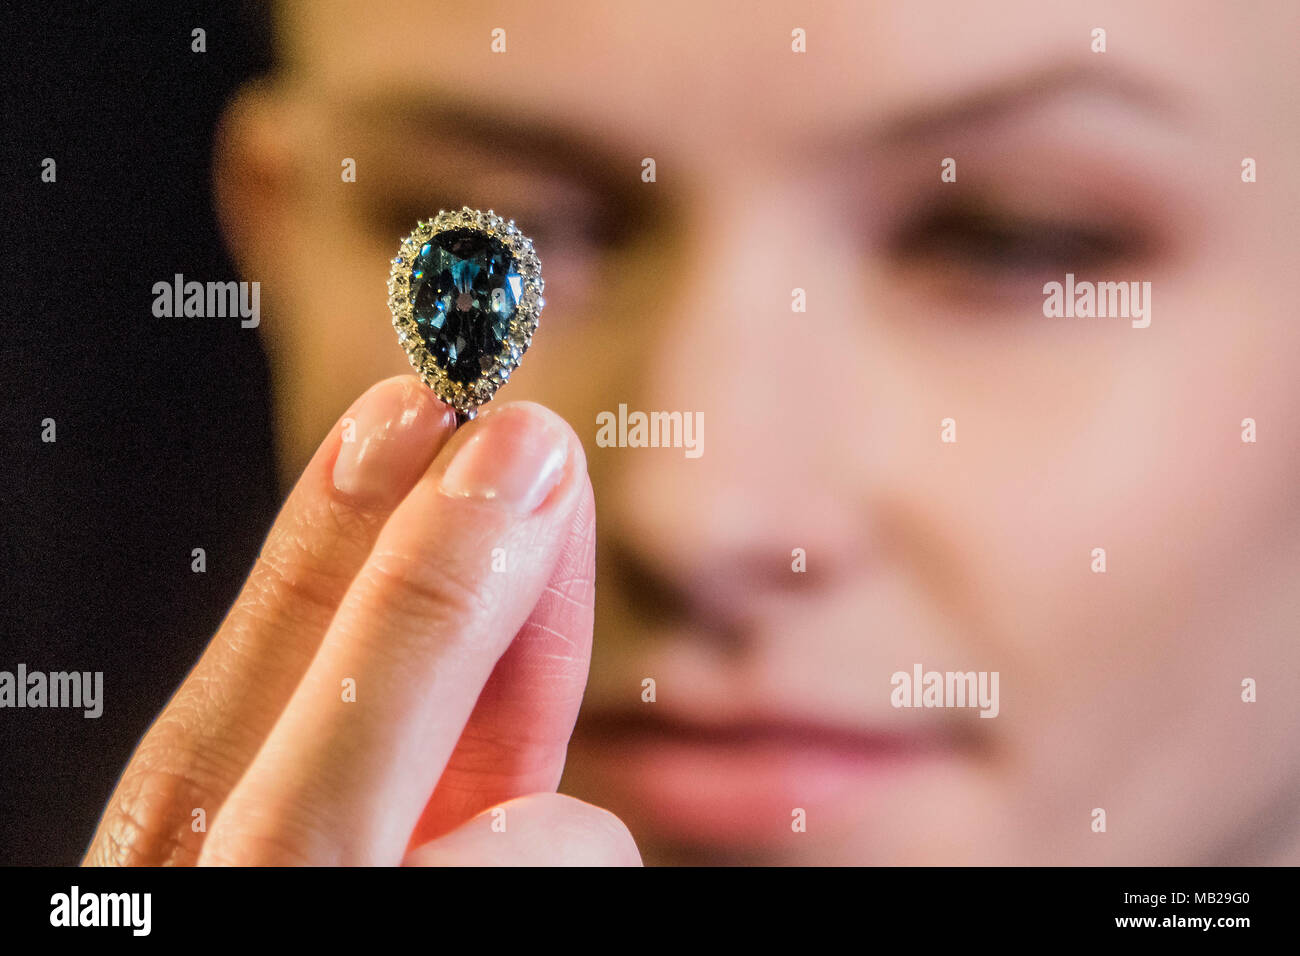 London, UK. 6th Apr, 2018. The Farnese Blue – will appear on the market for the first time in history this spring, after having remained in the same family for over three centuries. Given to Elisabeth Farnese, Queen of Spain (1692-1766). The 6.16-carat pear shaped blue diamond has an estimate of CHF 3.5 - 5 million (US$ 3.7 - 5.3 million) - Diamonds to be offered in Sotheby’s Geneva sale of Magnificent Jewels and Noble Jewels on 15 May. on display at Sotheby’s New Bond Street, London. Credit: Guy Bell/Alamy Live News Stock Photo